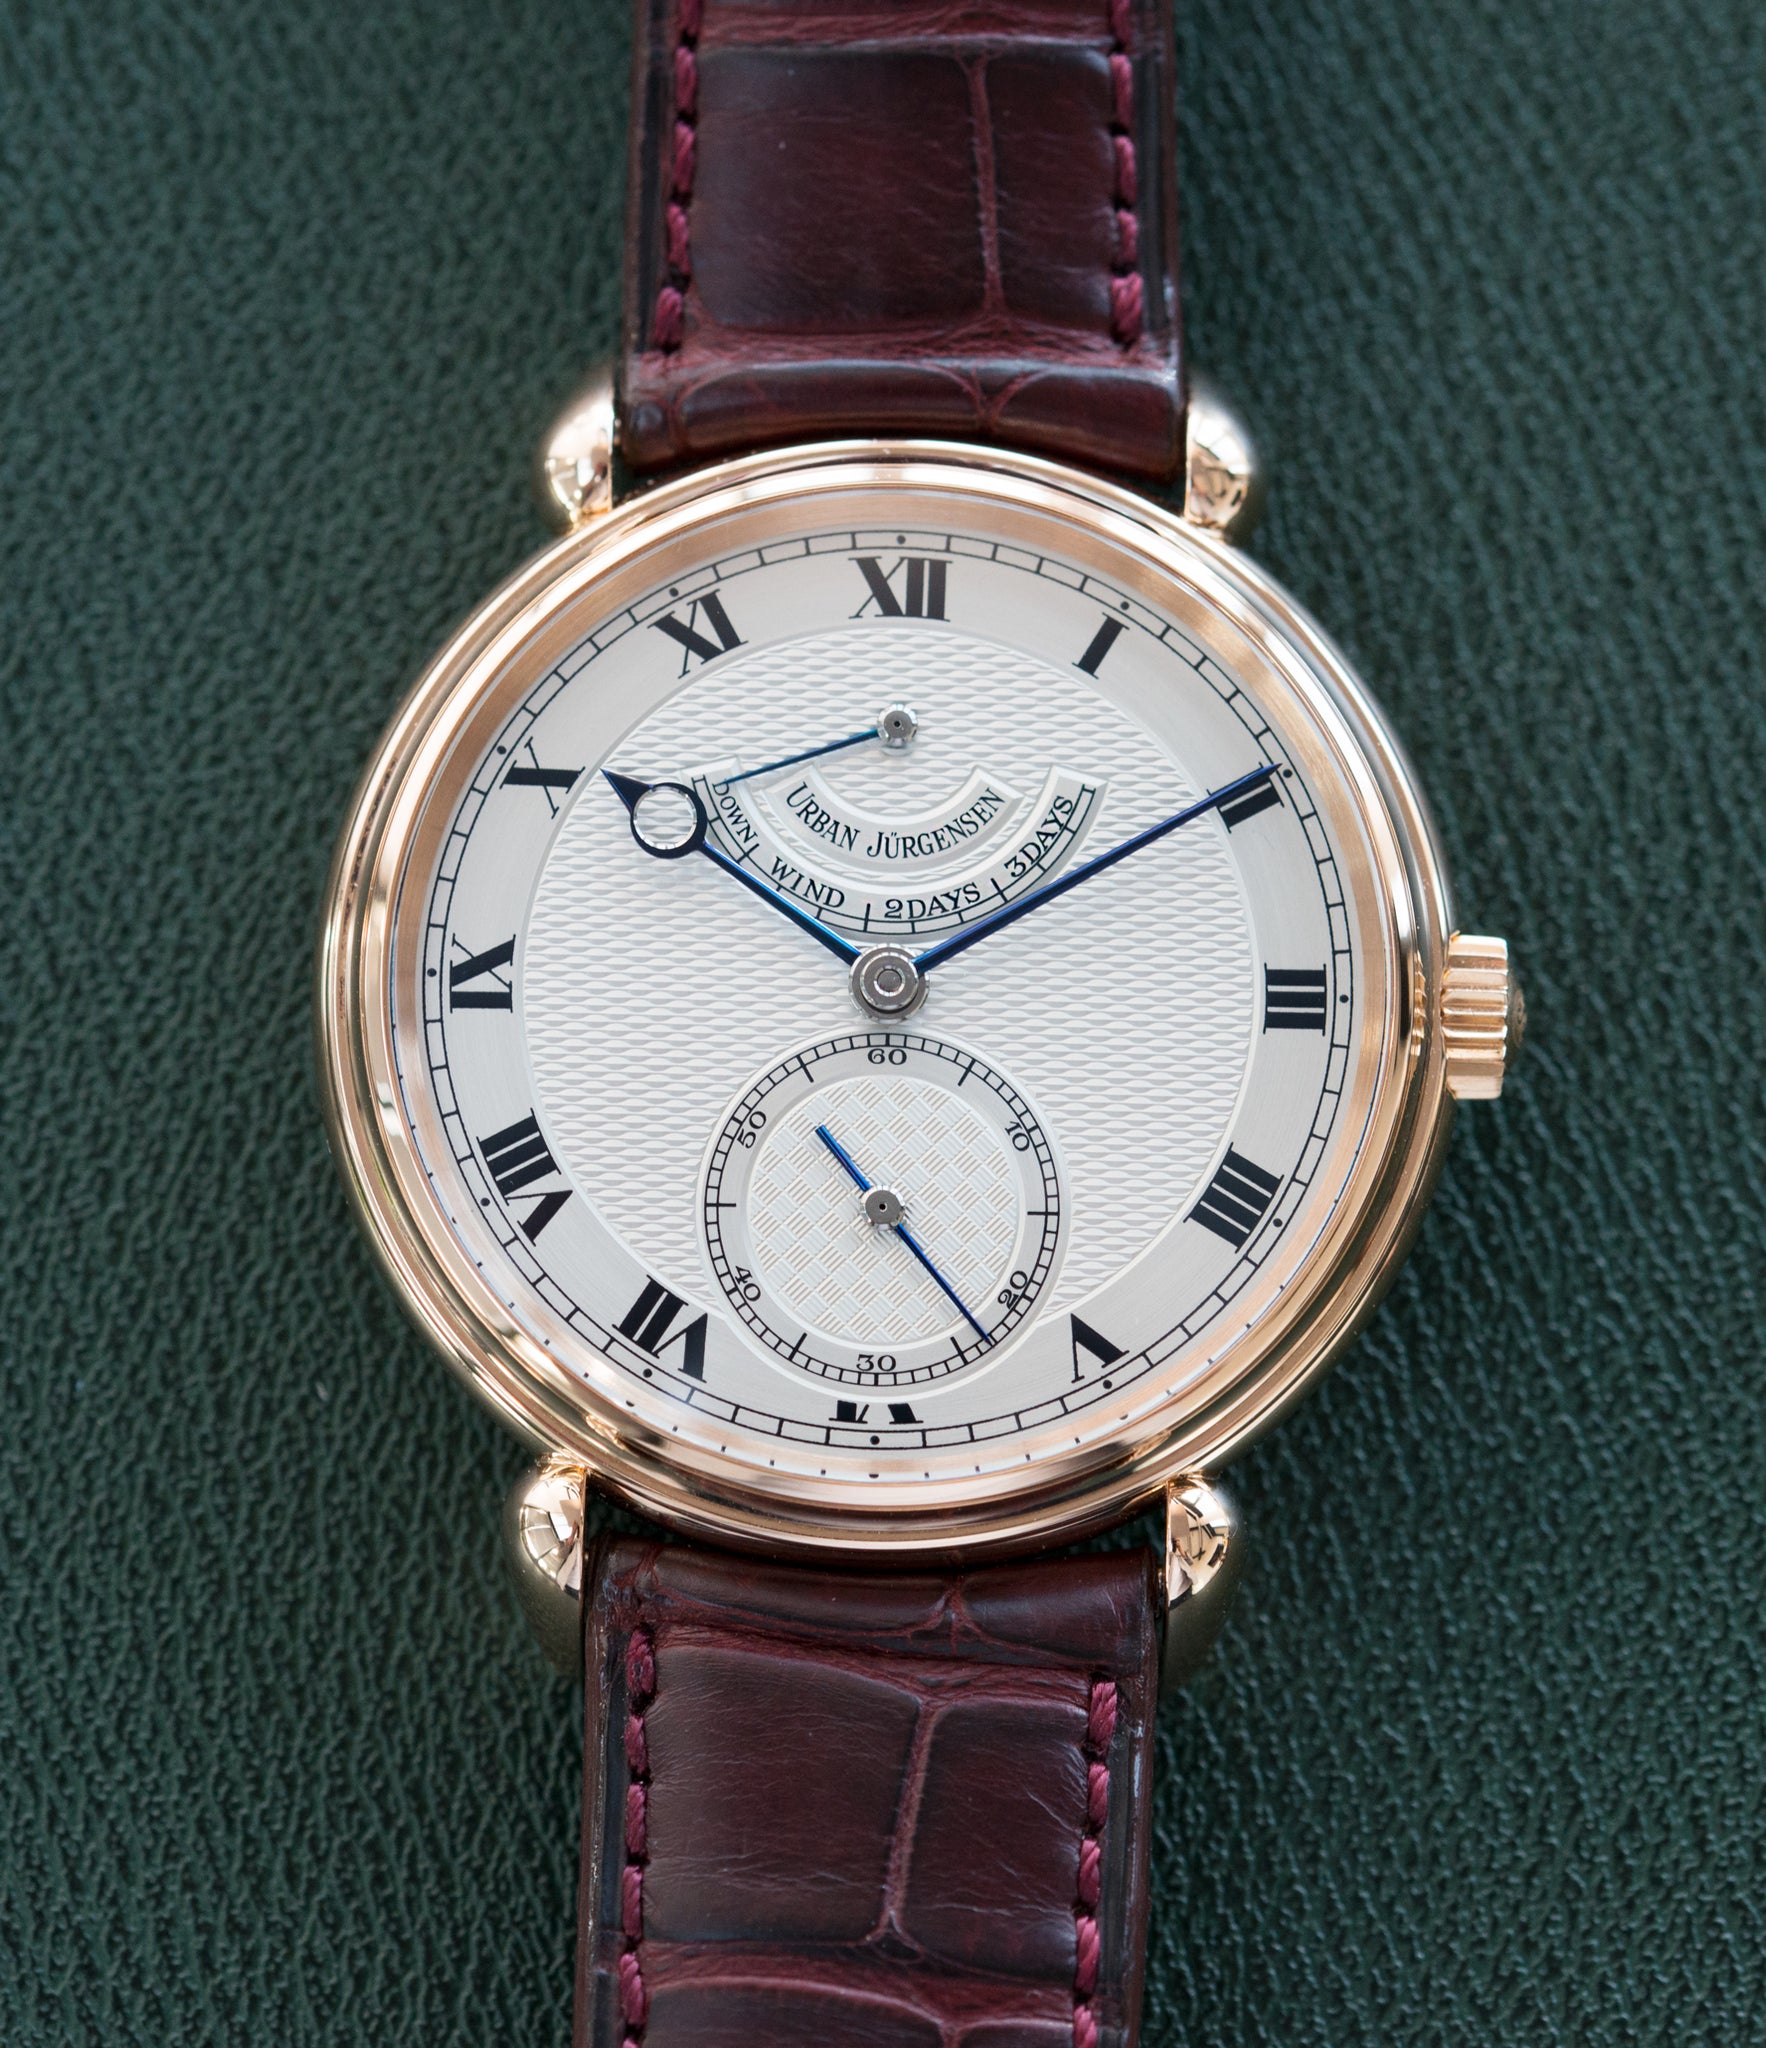 buy men's luxury preowned dress watch Urban Jurgensen 11L rose gold watch full set at A Collected Man London United Kingdom online specialist of independent watchmakers